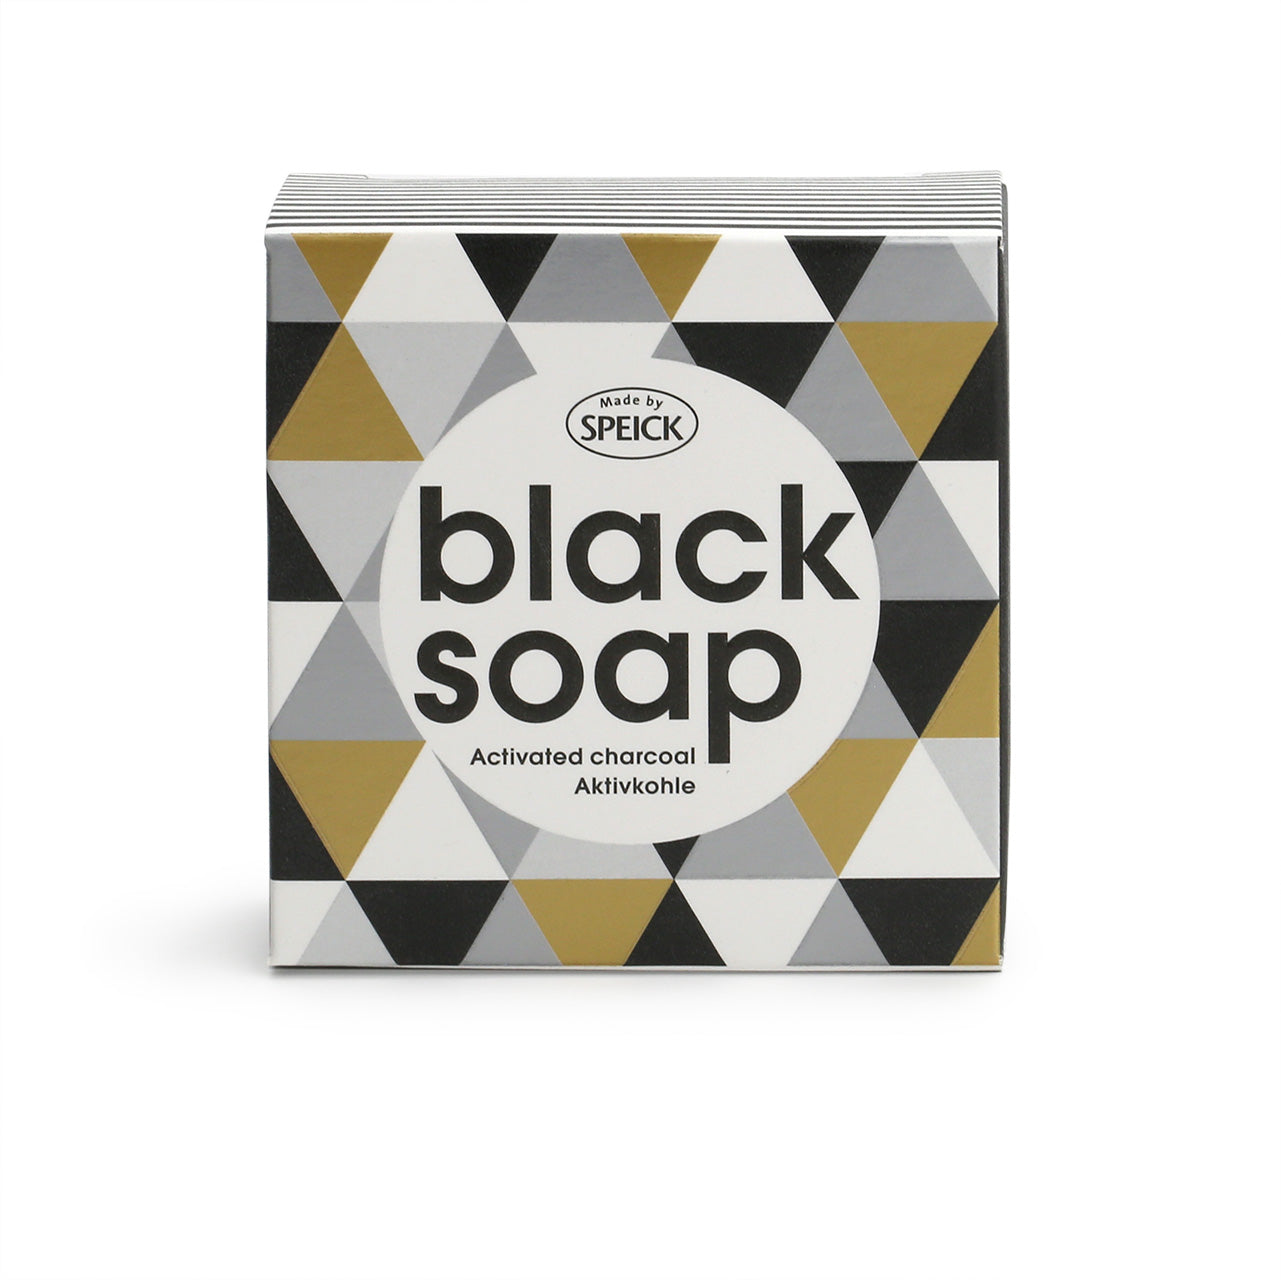 Speickactivated charcoal soap with its black white silver and gold box